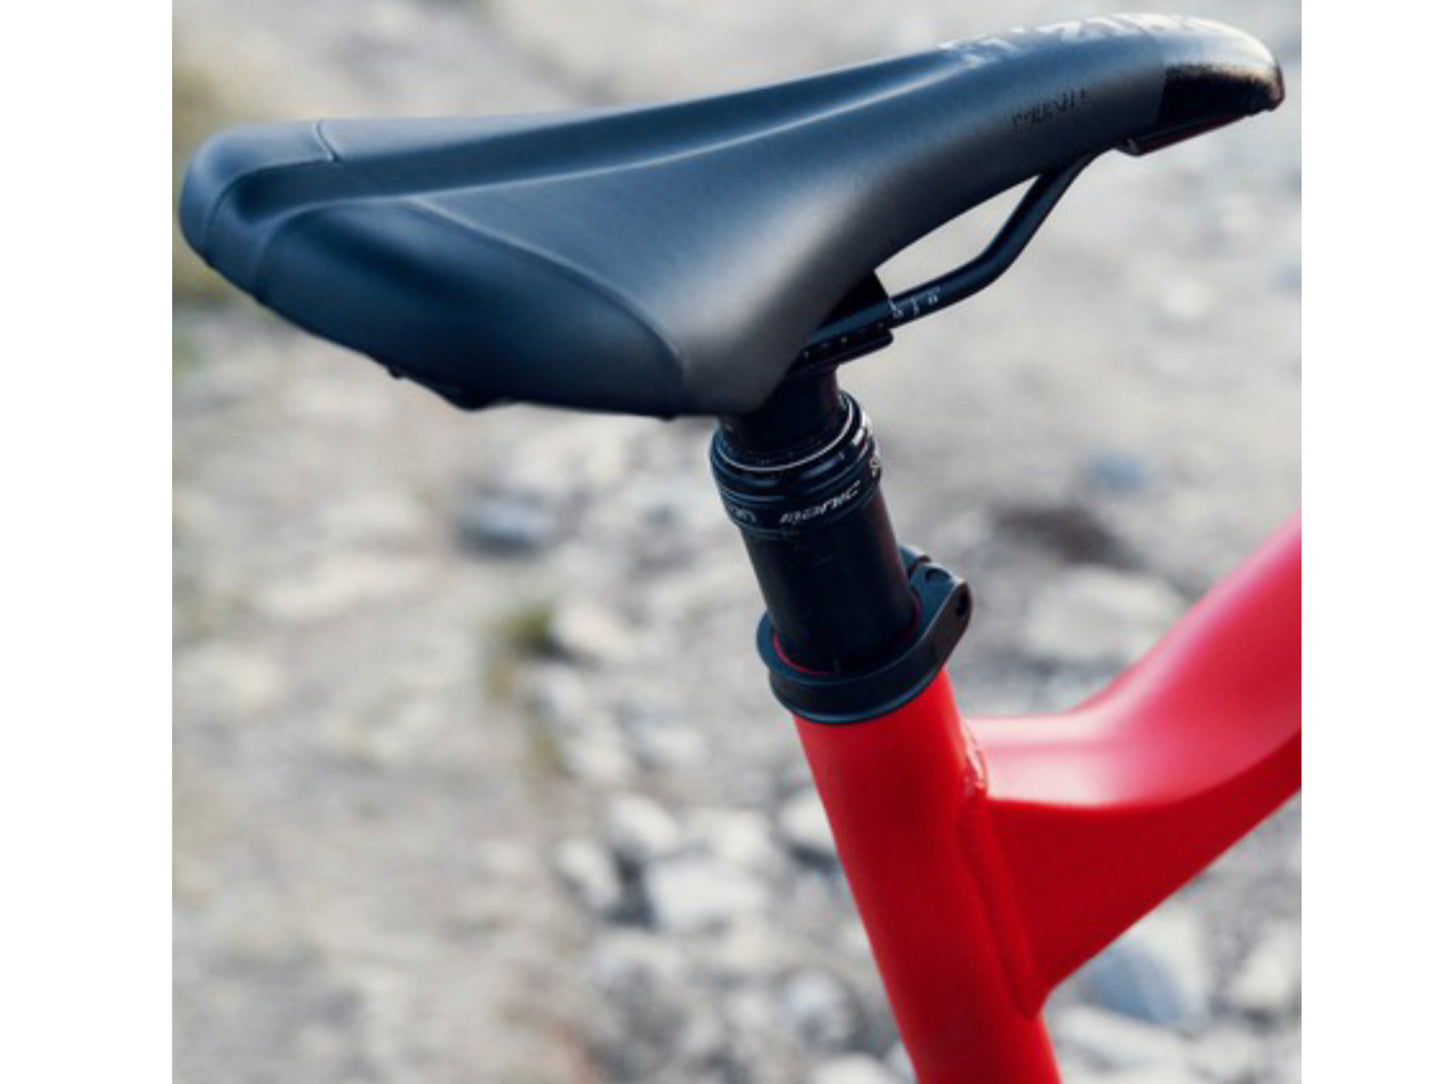 Riese and Muller Delite Mountain Touring eMTB full suspension close up saddle dropper seatpost